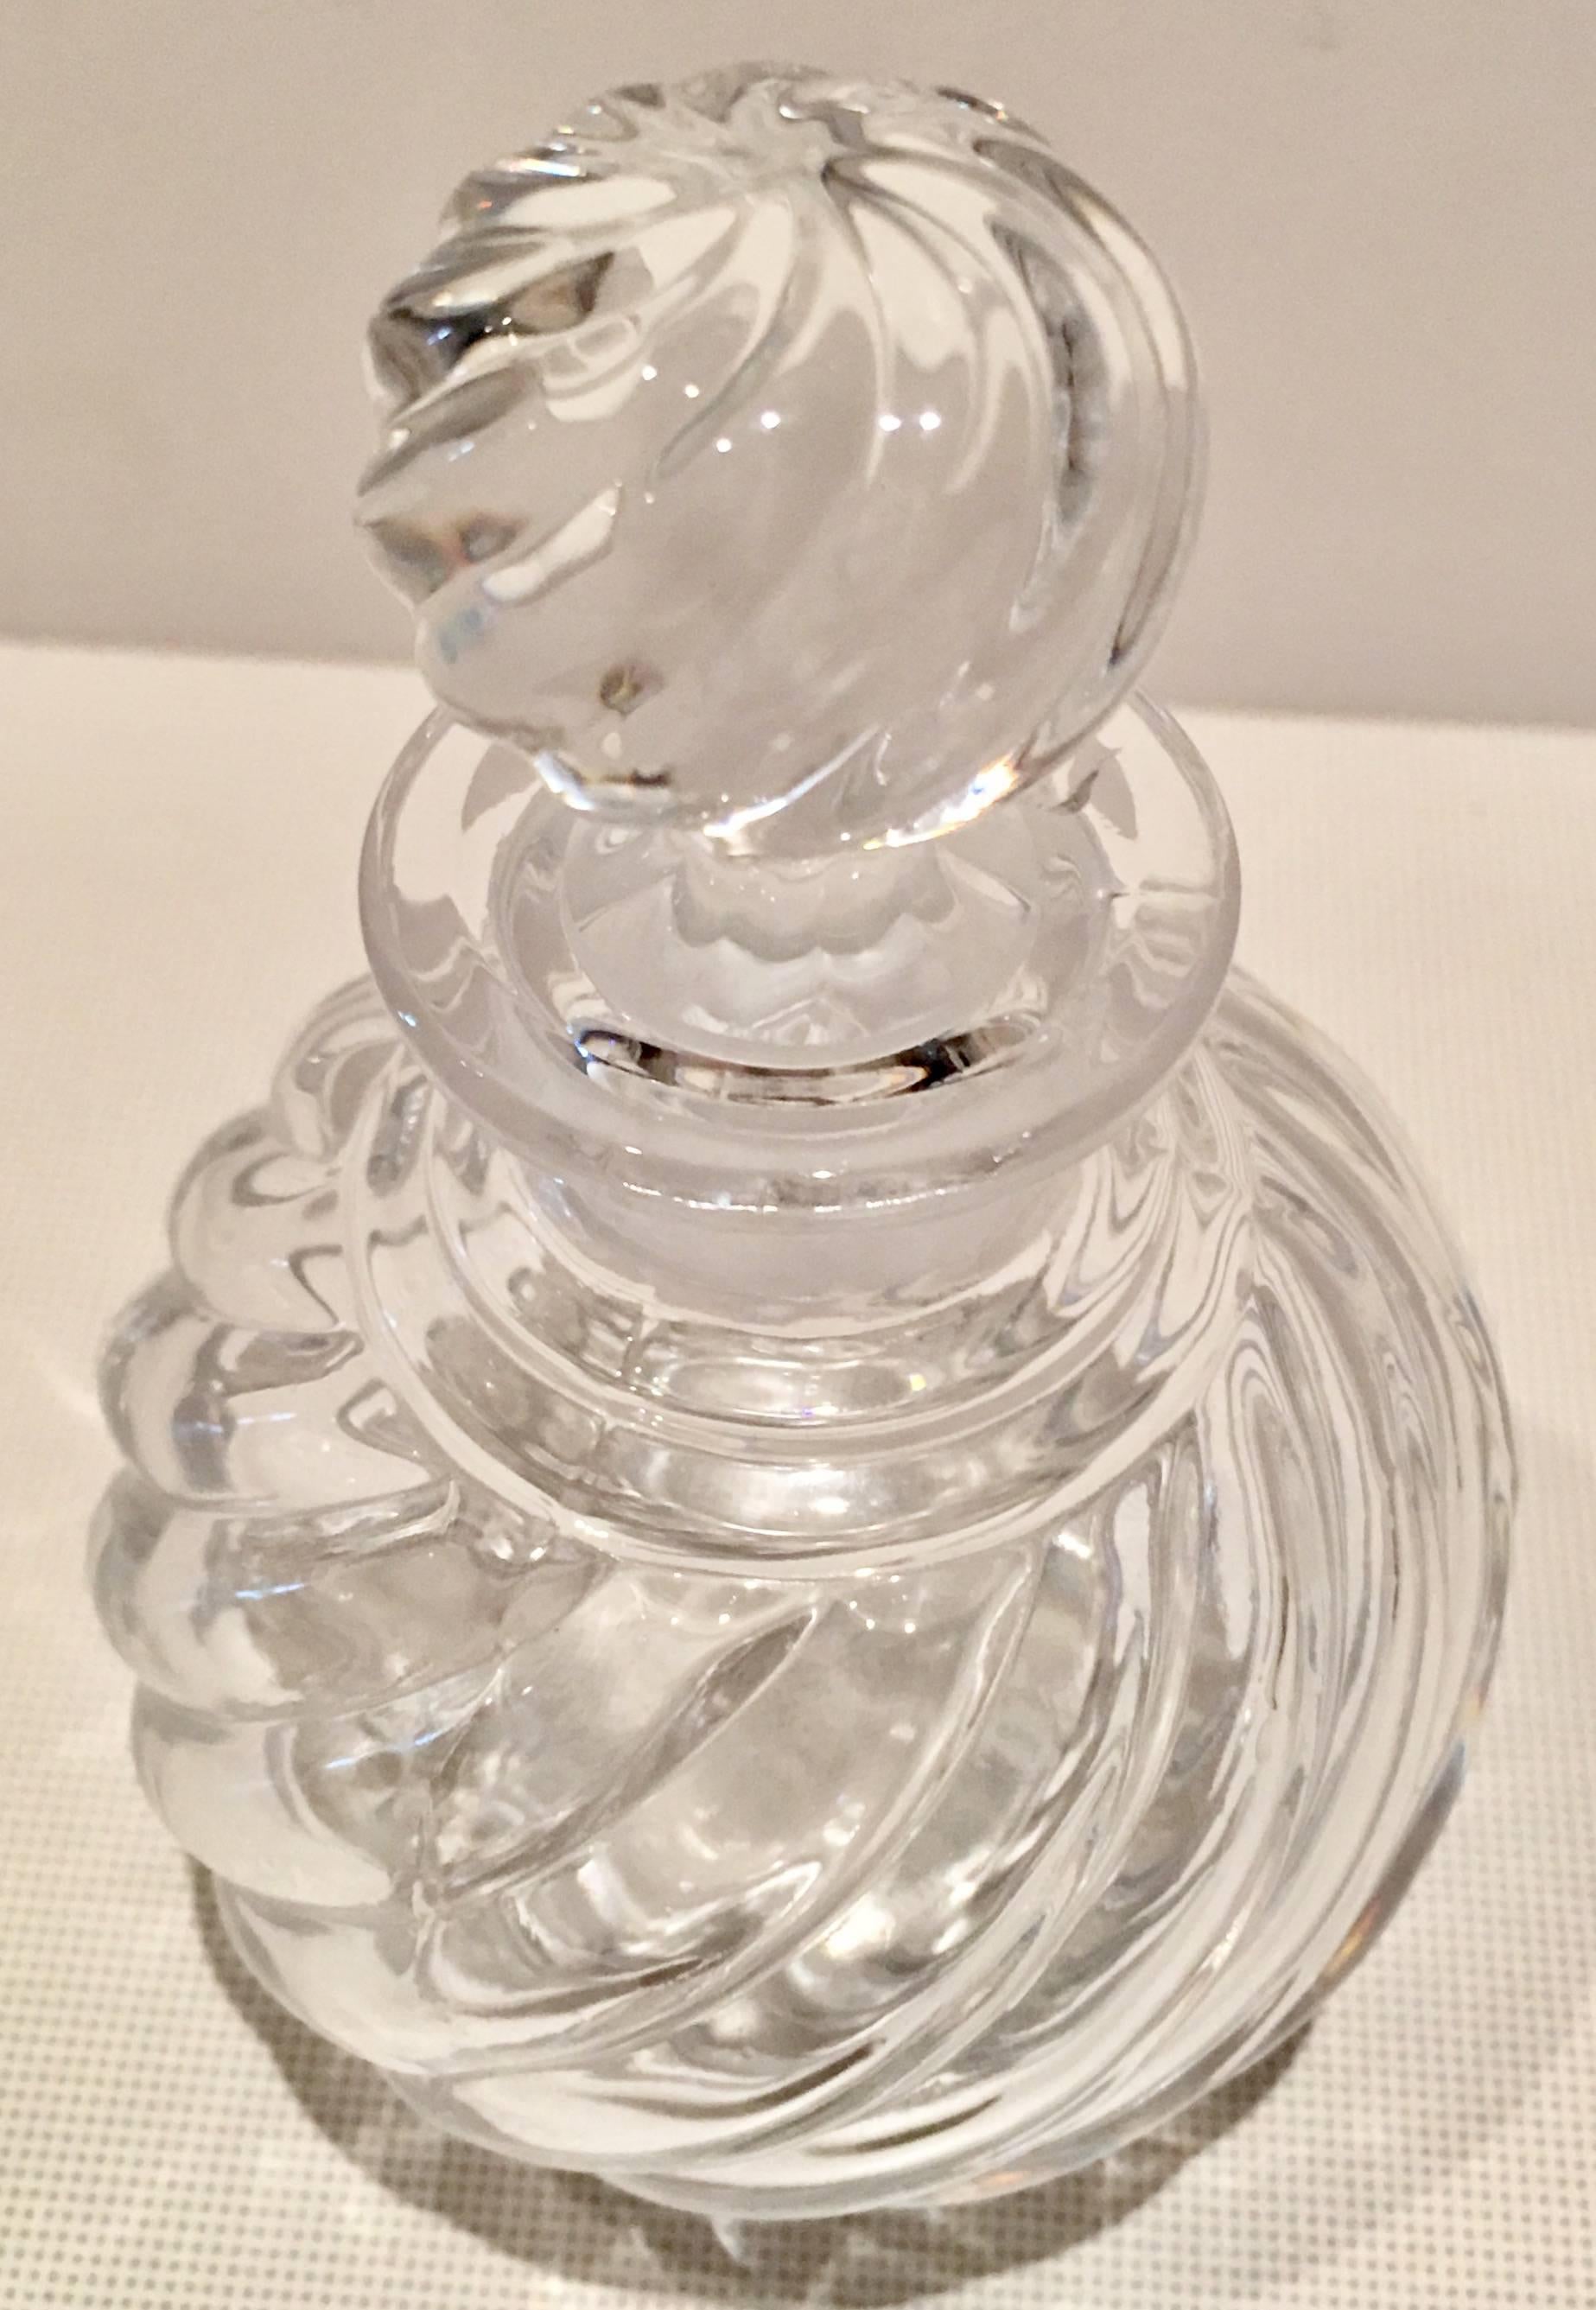 Vintage Baccarat France swirl pattern perfume decanter with stopper. Signed on the underside Baccarat France.